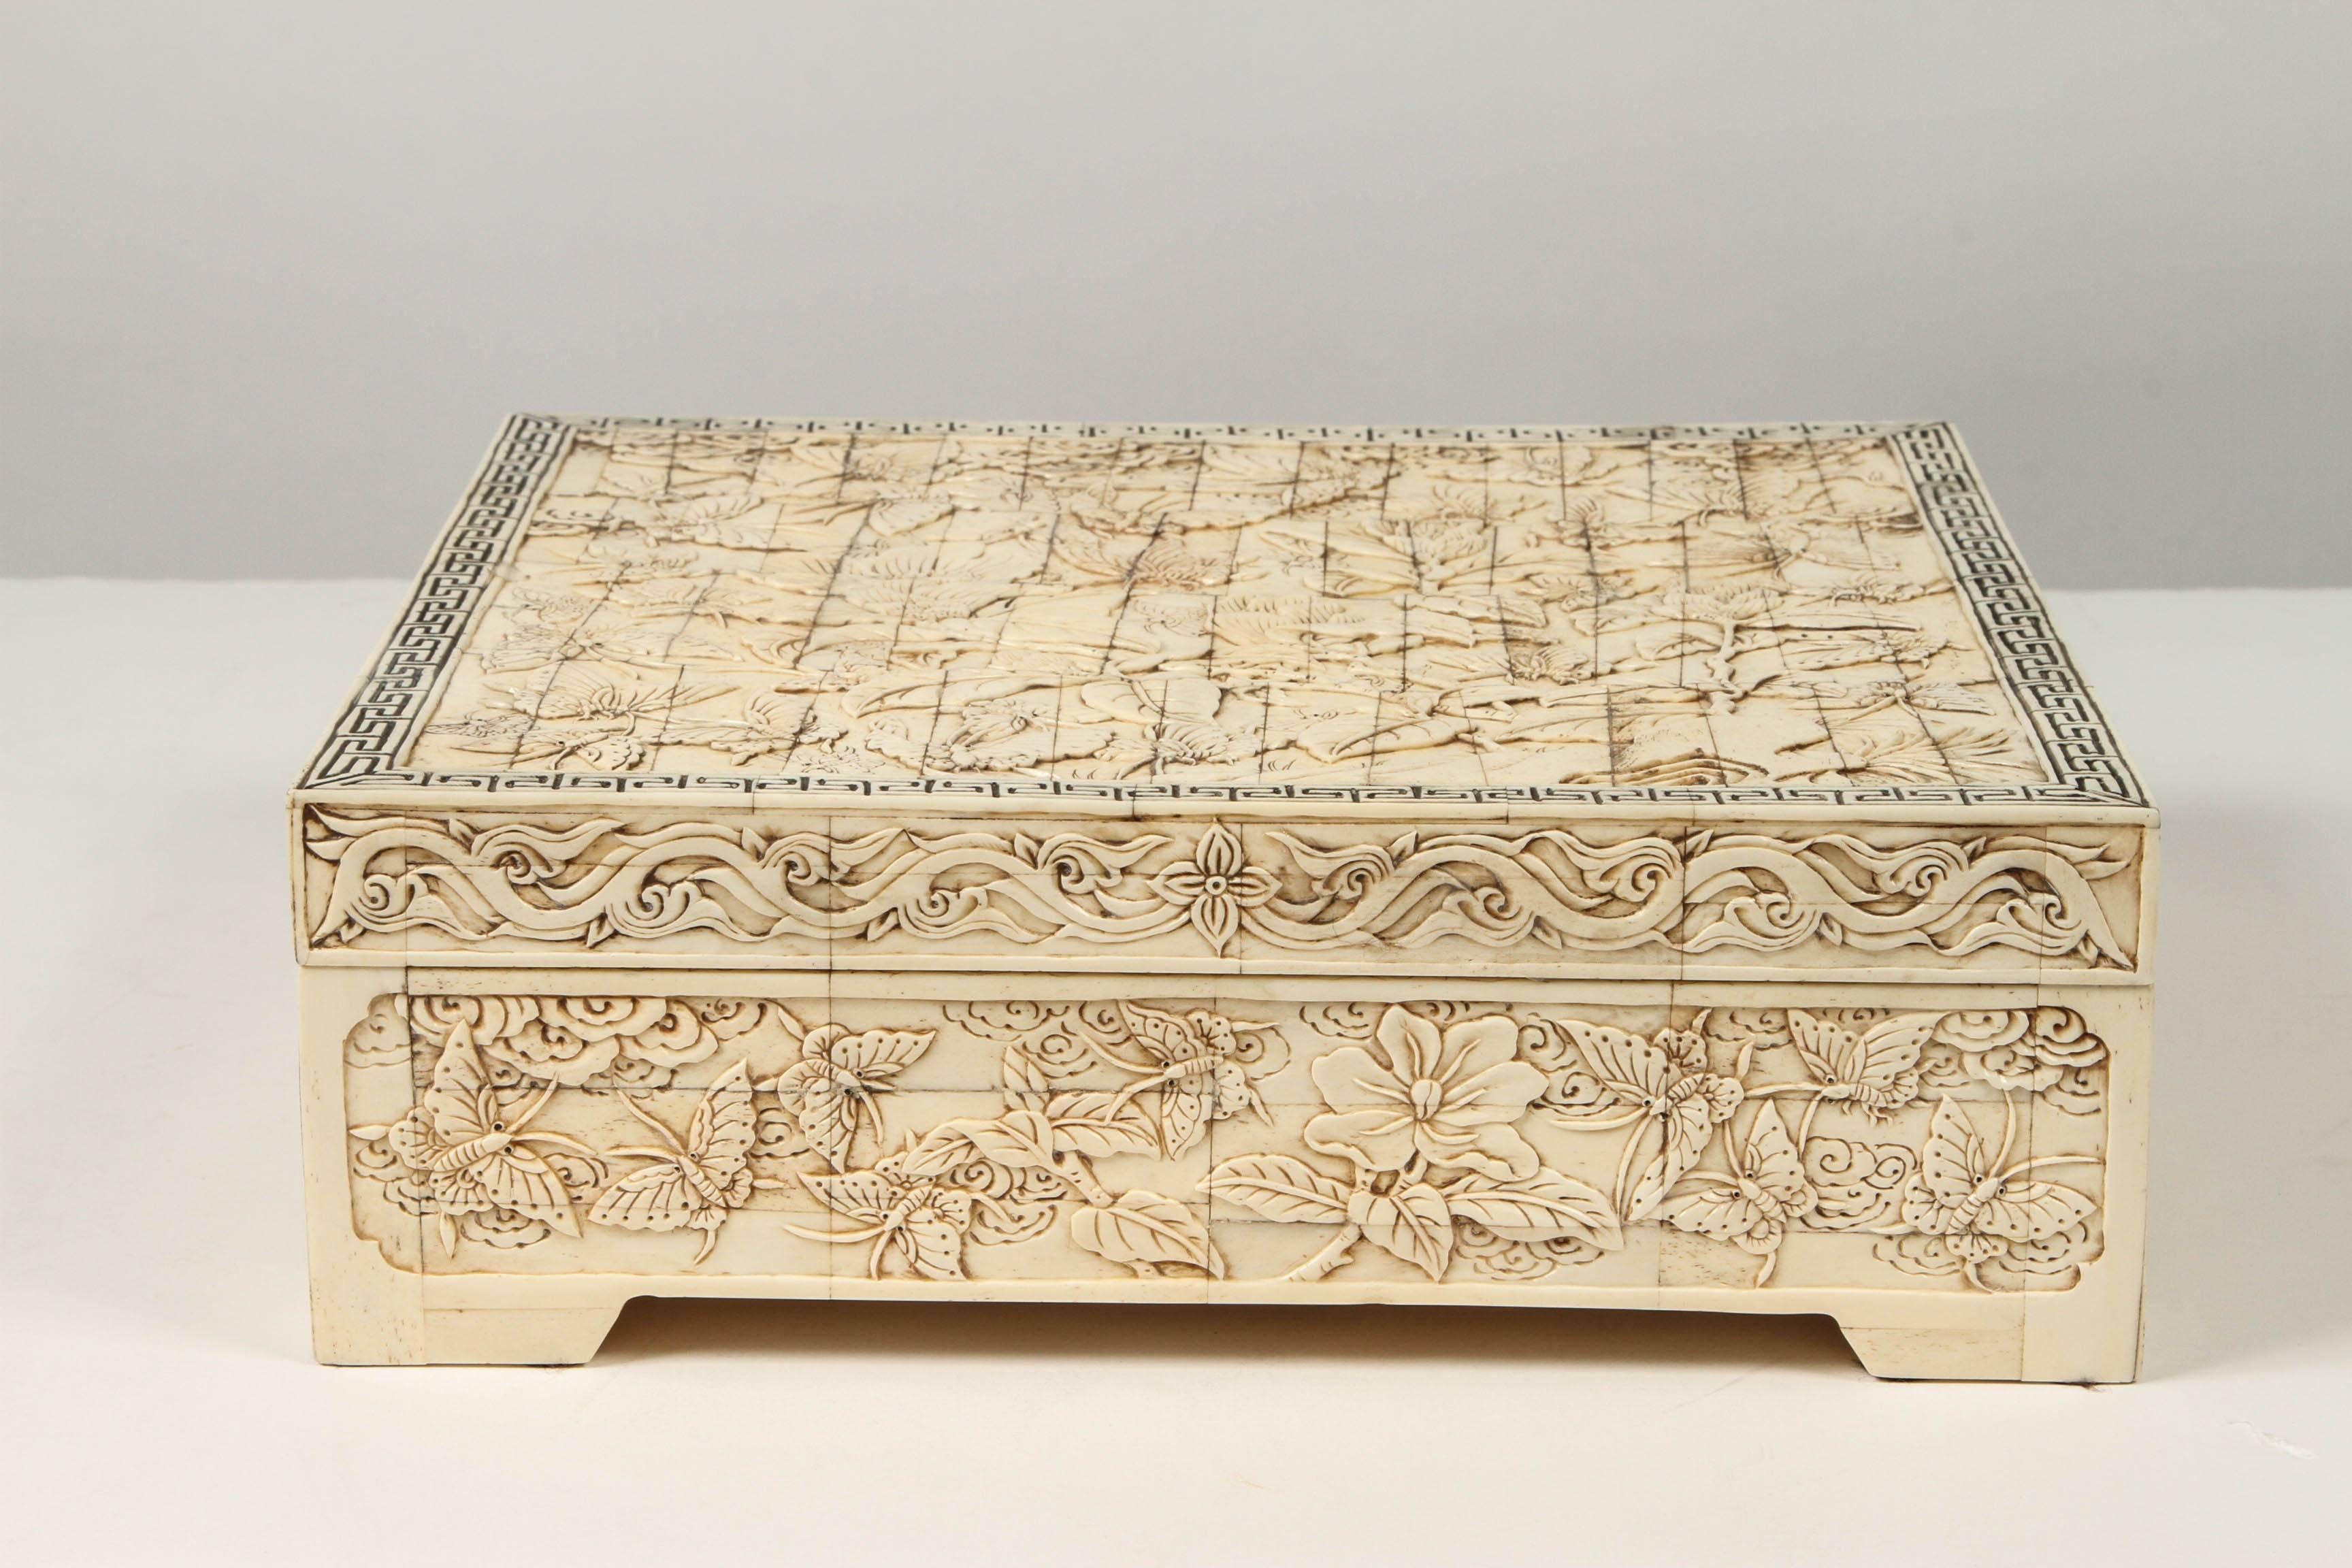 Finely carved square bone box.  Single lid opens to reveal a bone lined interior with a carved interior edge.